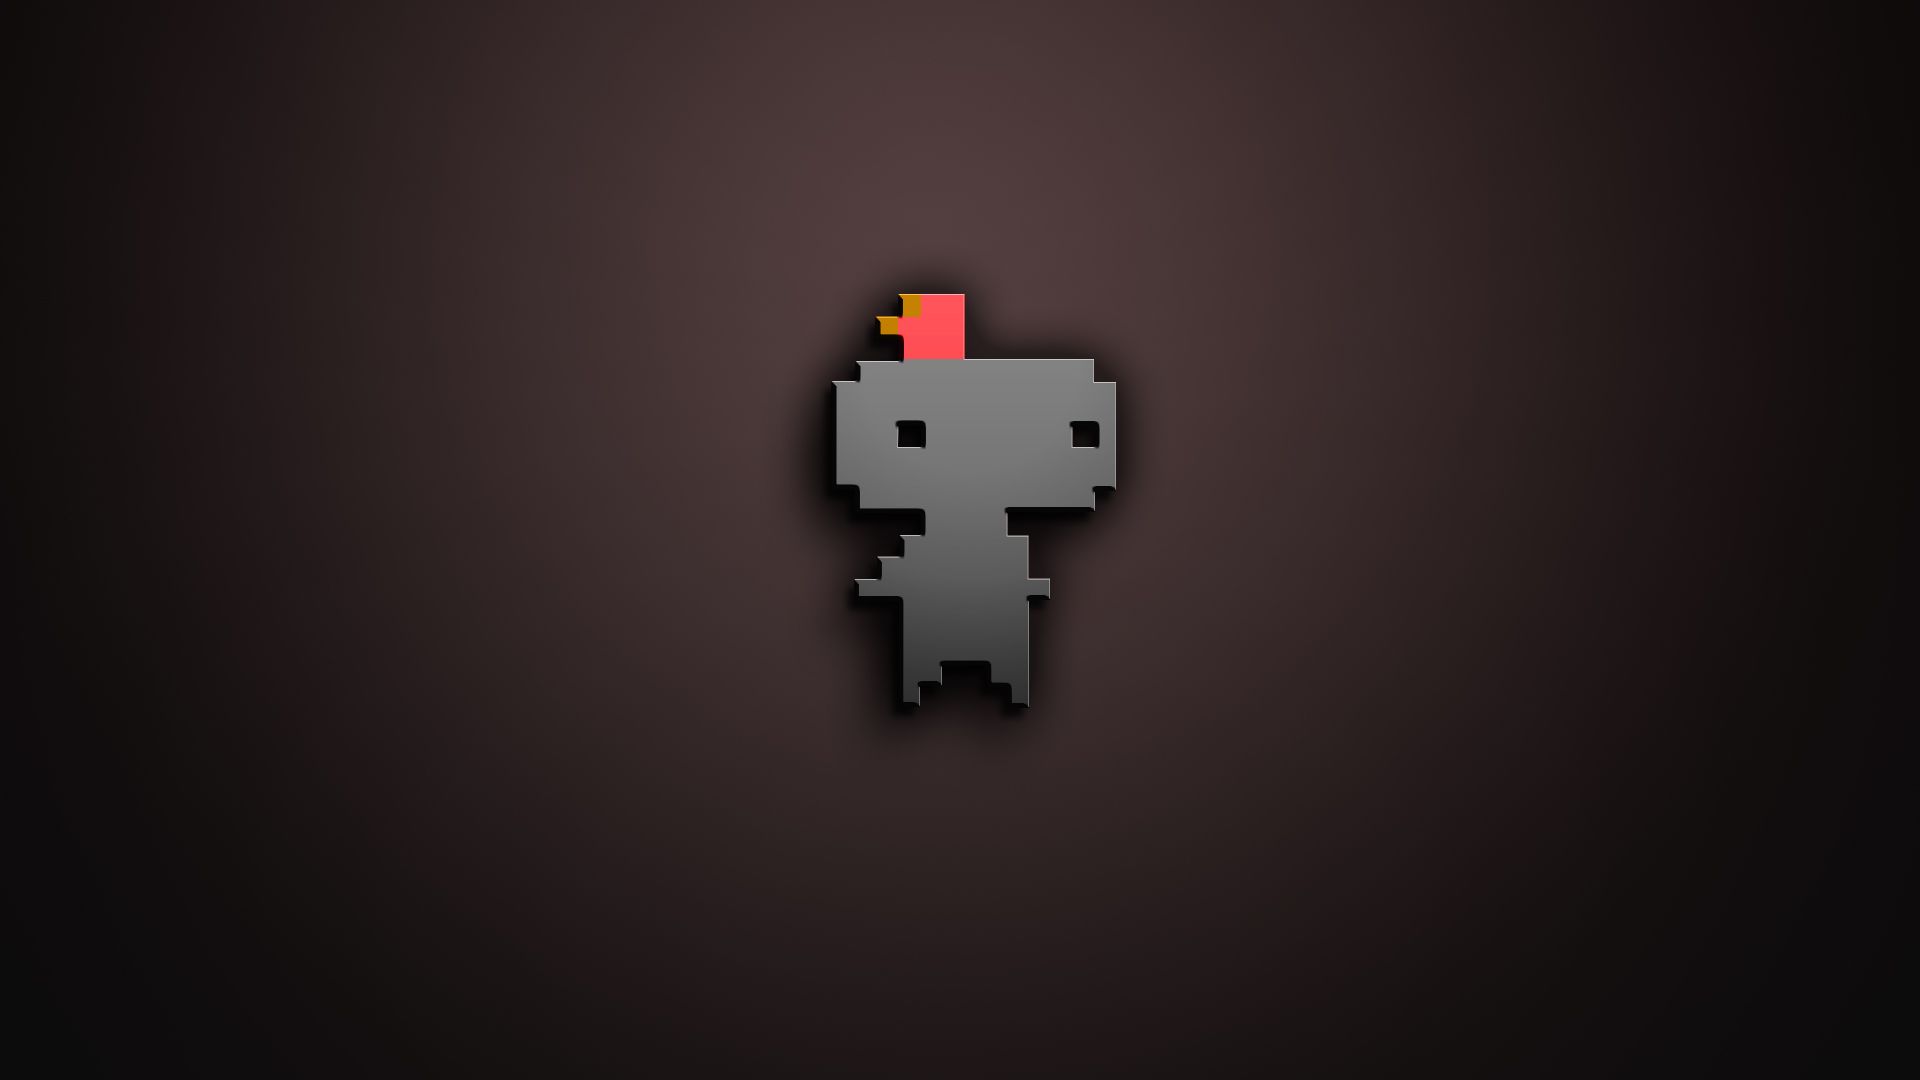 A small collection of video game minimalist wallpaper